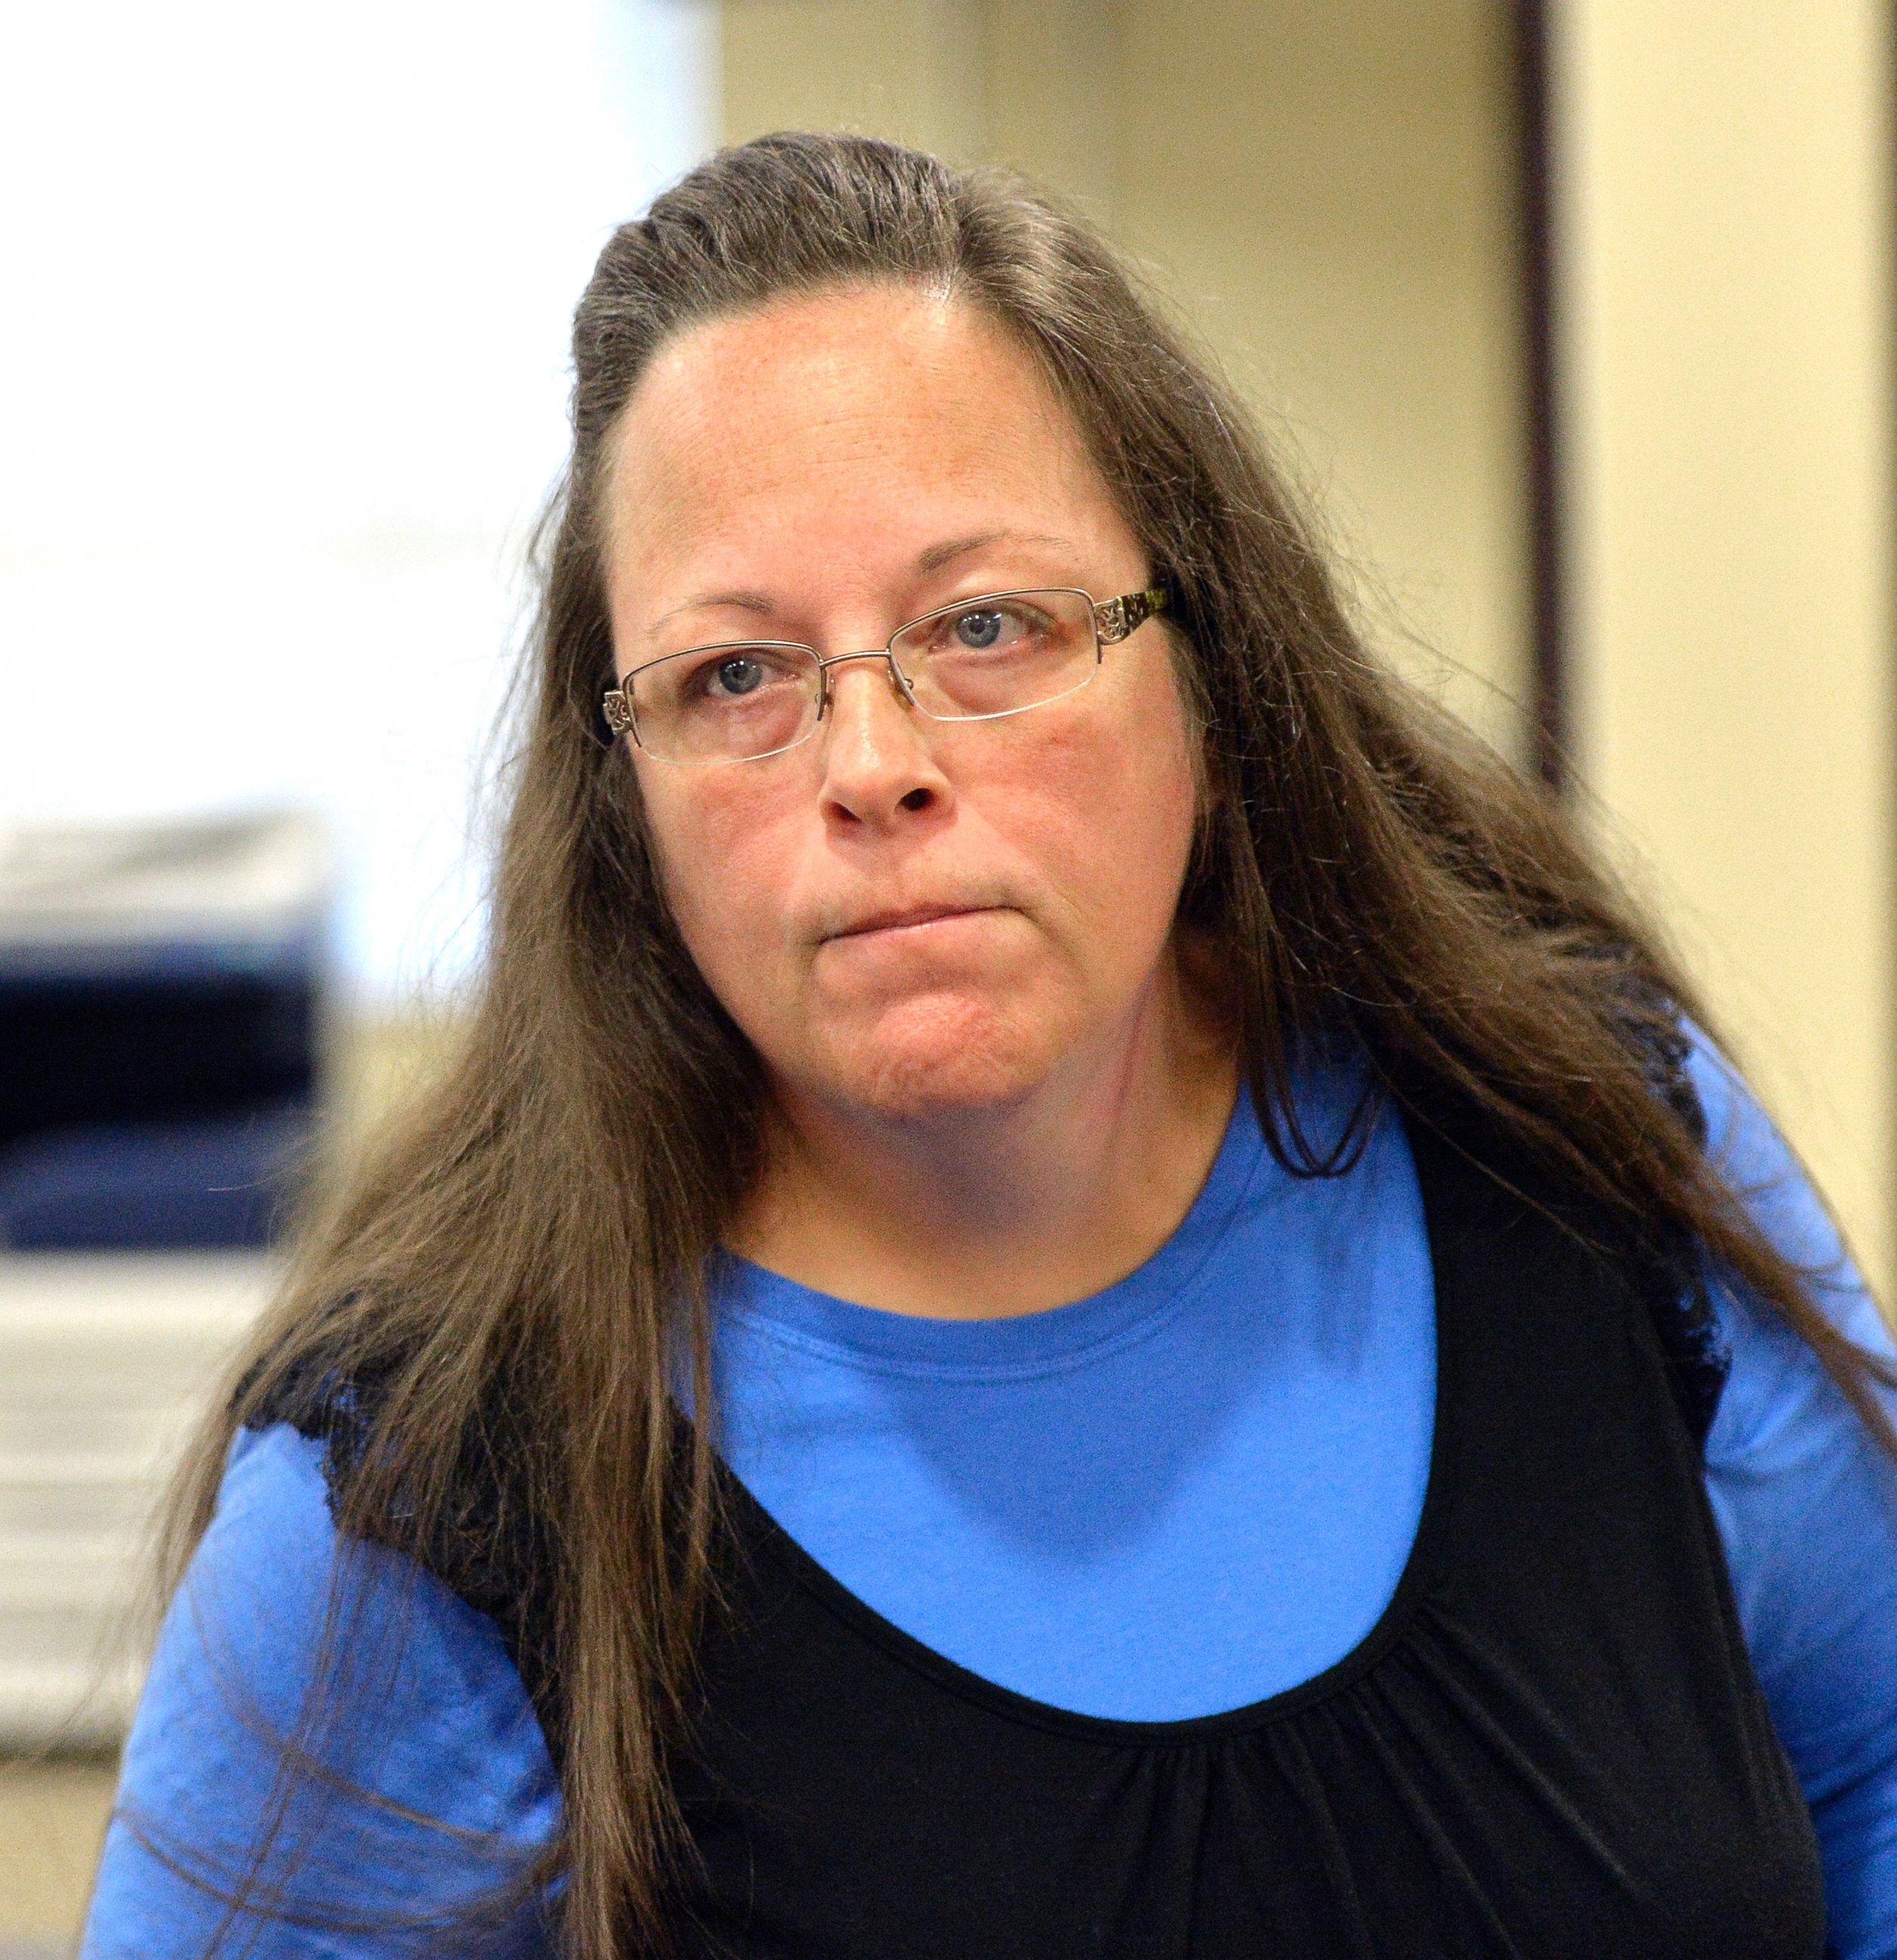 PHOTO:Rowan County Clerk Kim Davis listens to a customer following her office's refusal to issue marriage licenses, Sept. 1, 2015,at the Rowan County Courthouse in Morehead, Ky. 